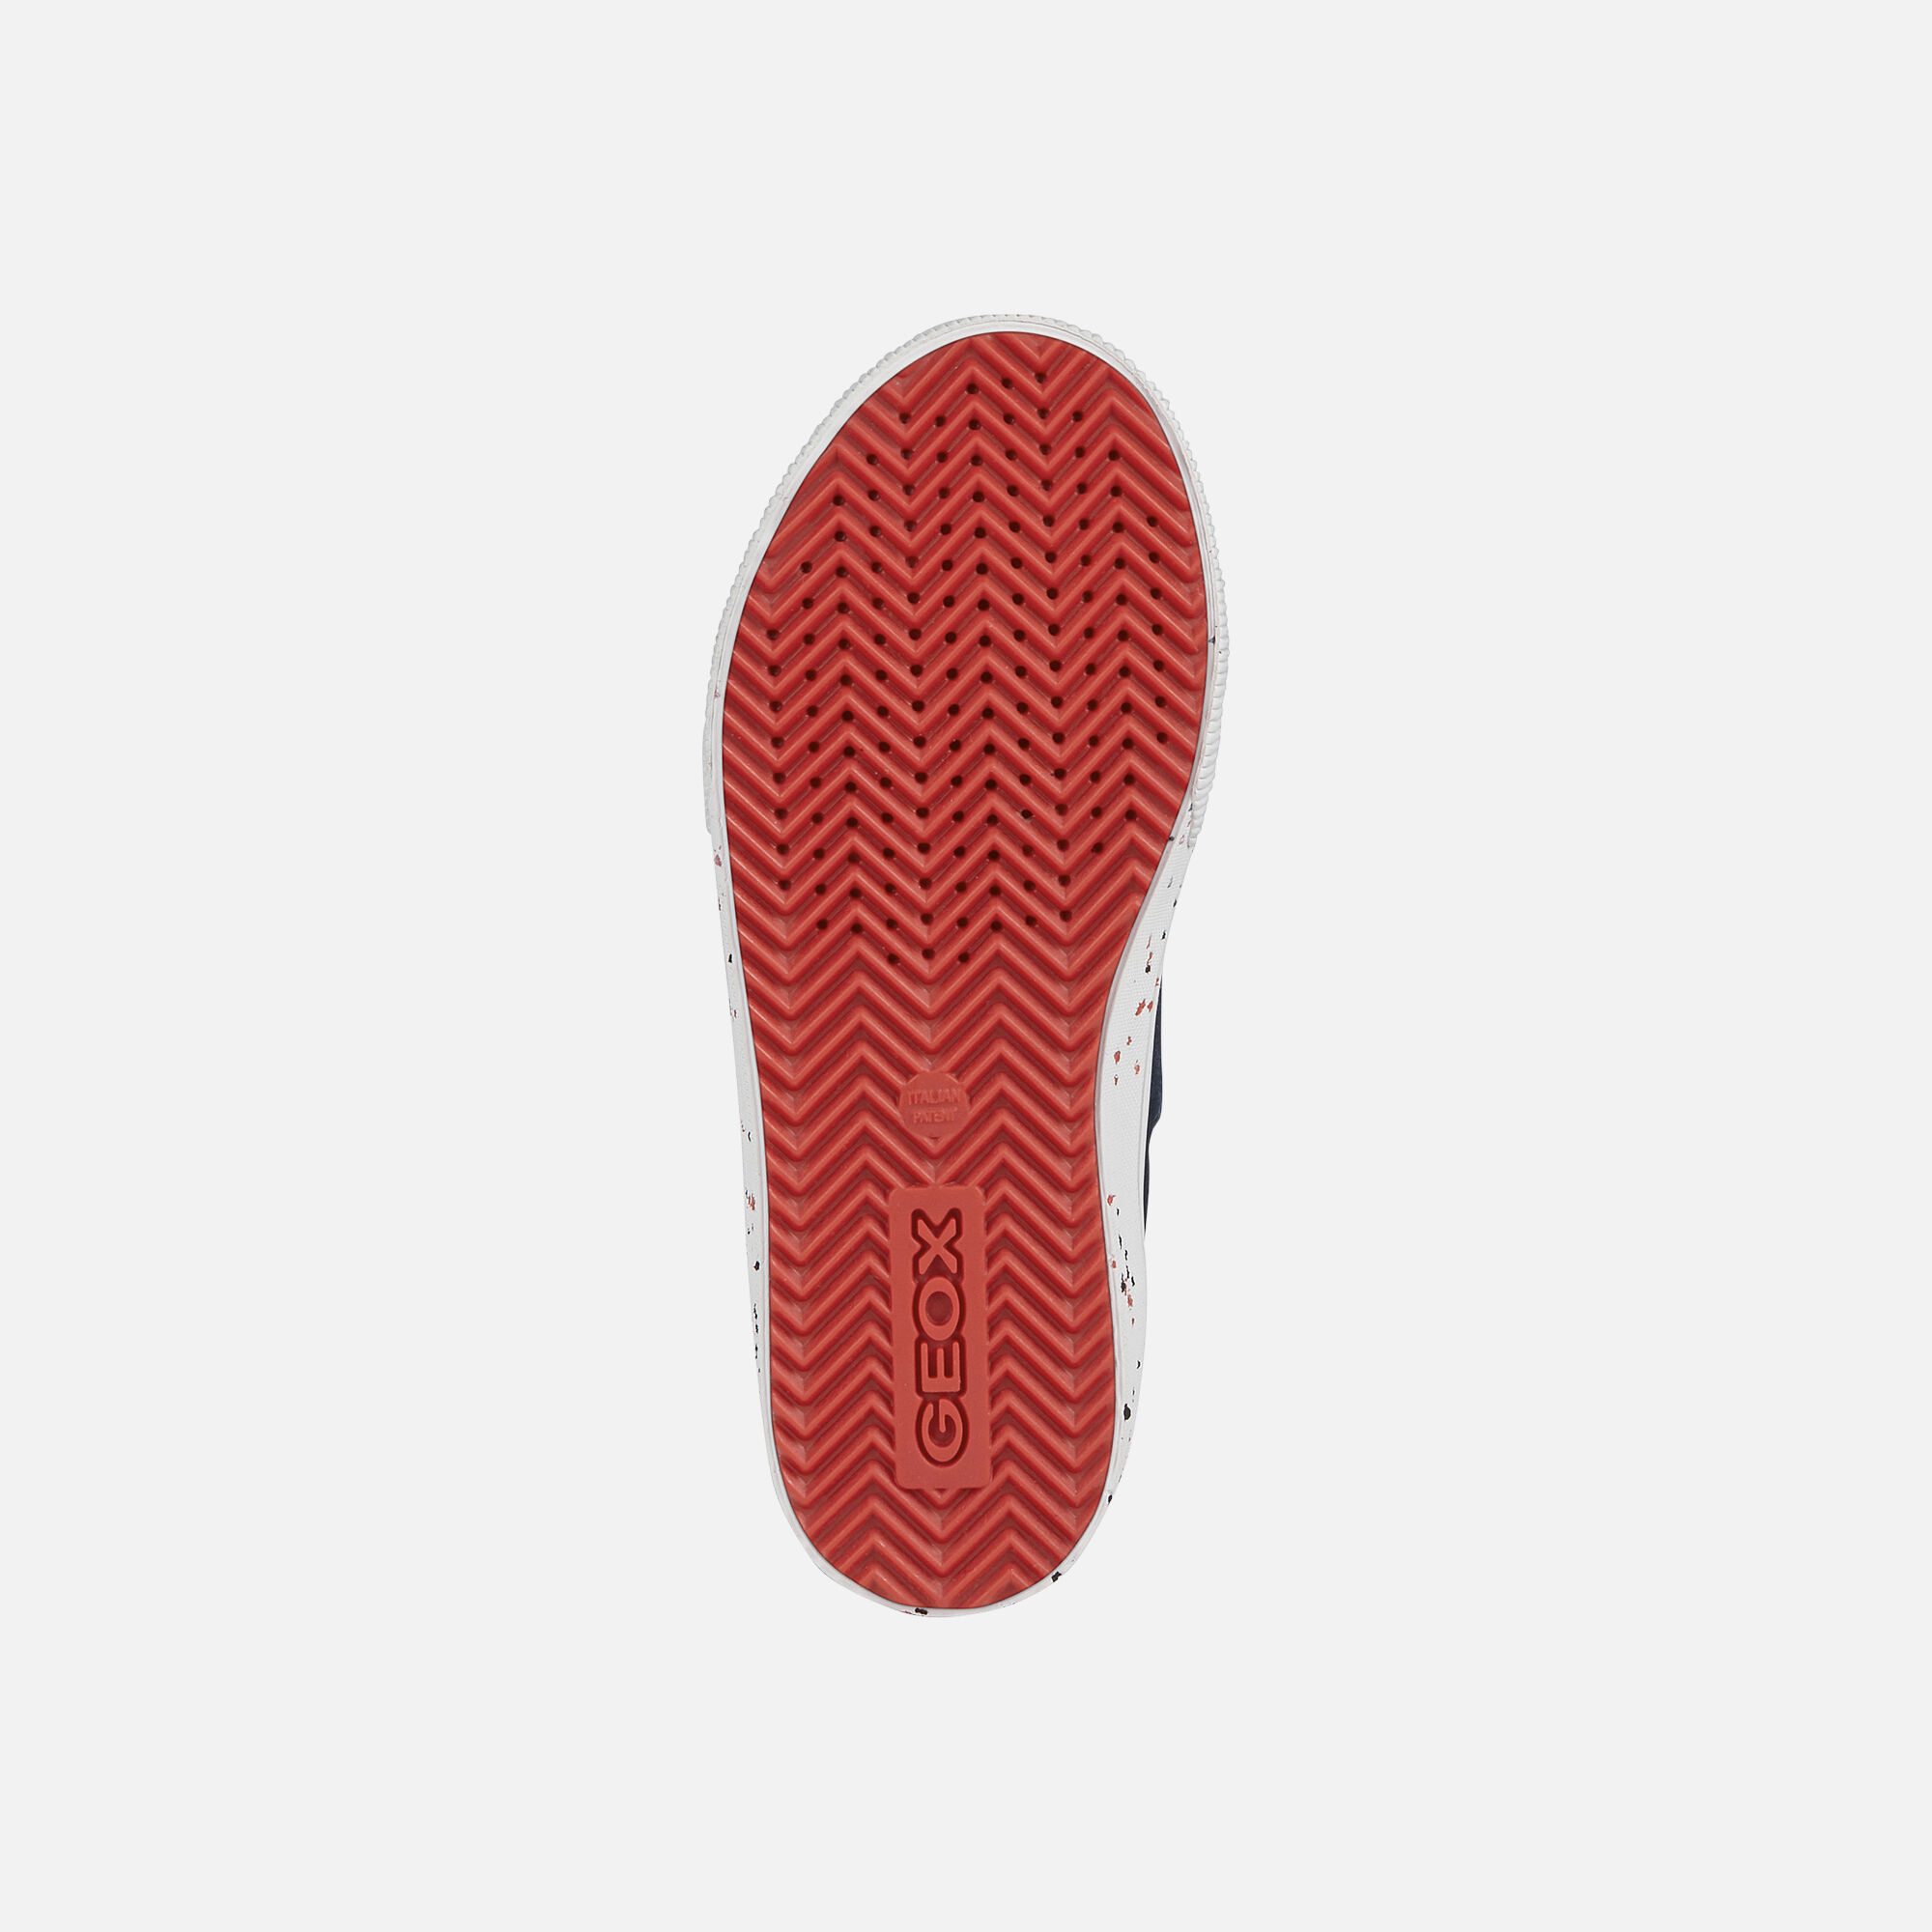 geox red shoes